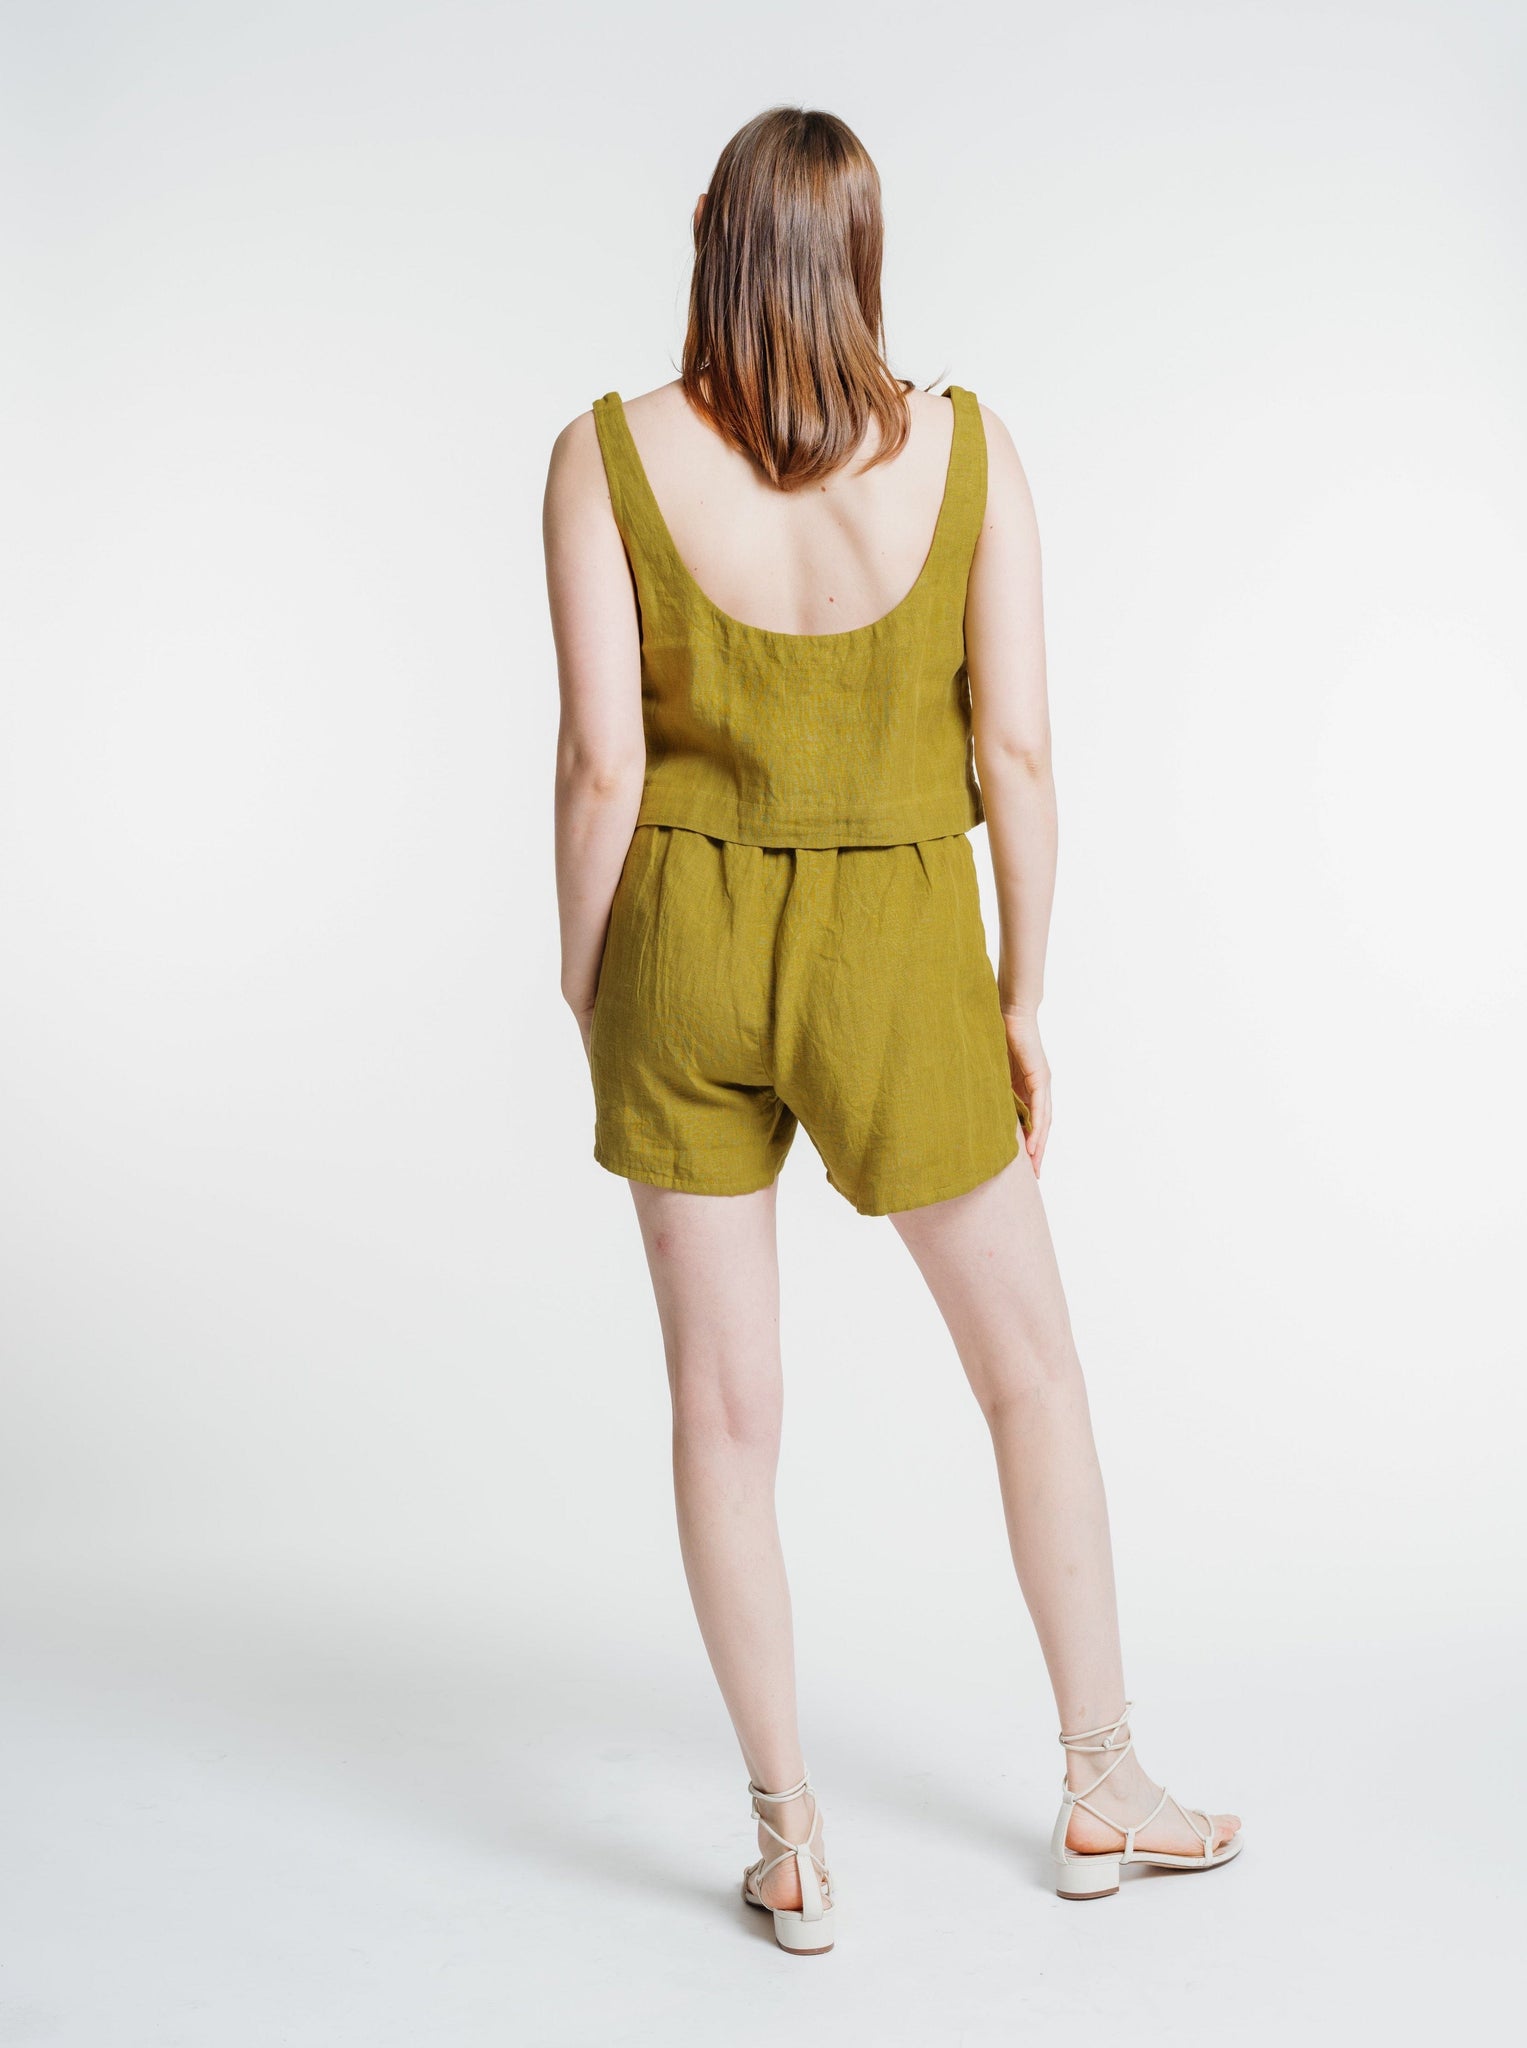 The back view of a woman wearing an Everyday Short - Dried Tobacco.